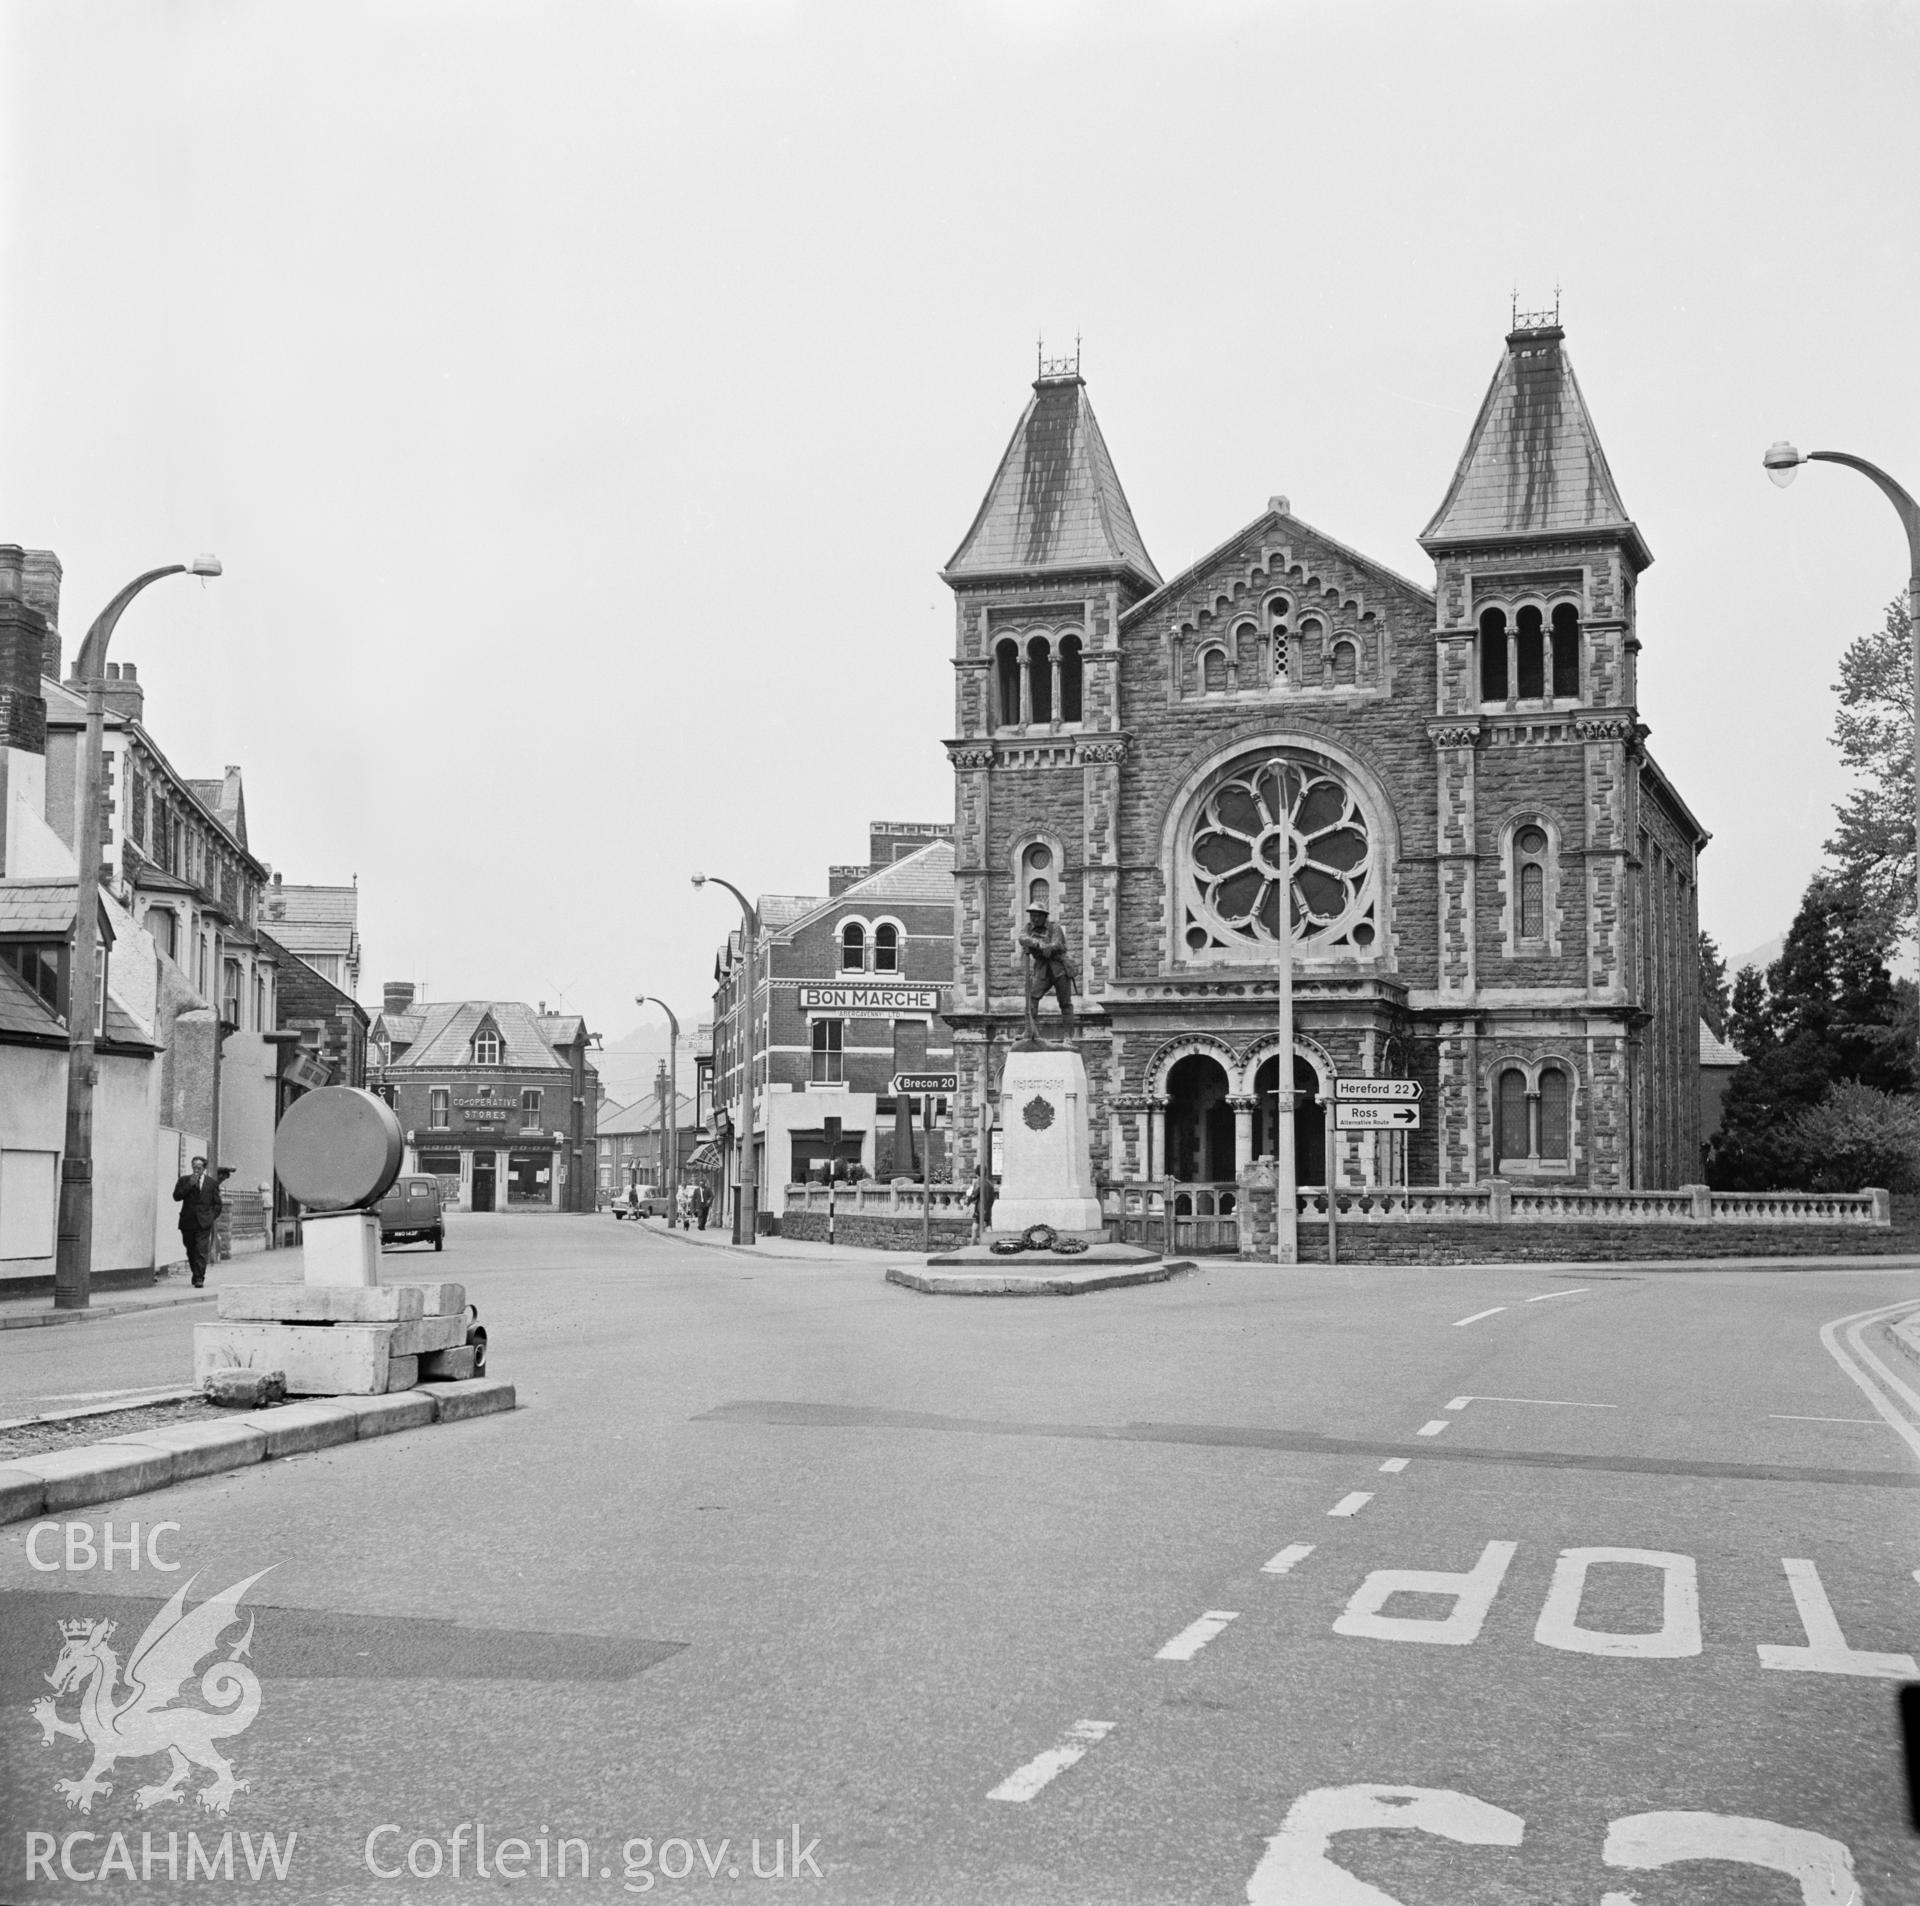 Undated black and white photograph of the Baptist Chapel, Frogmore Street, Abergavenny taken by J.A. Longbottom .